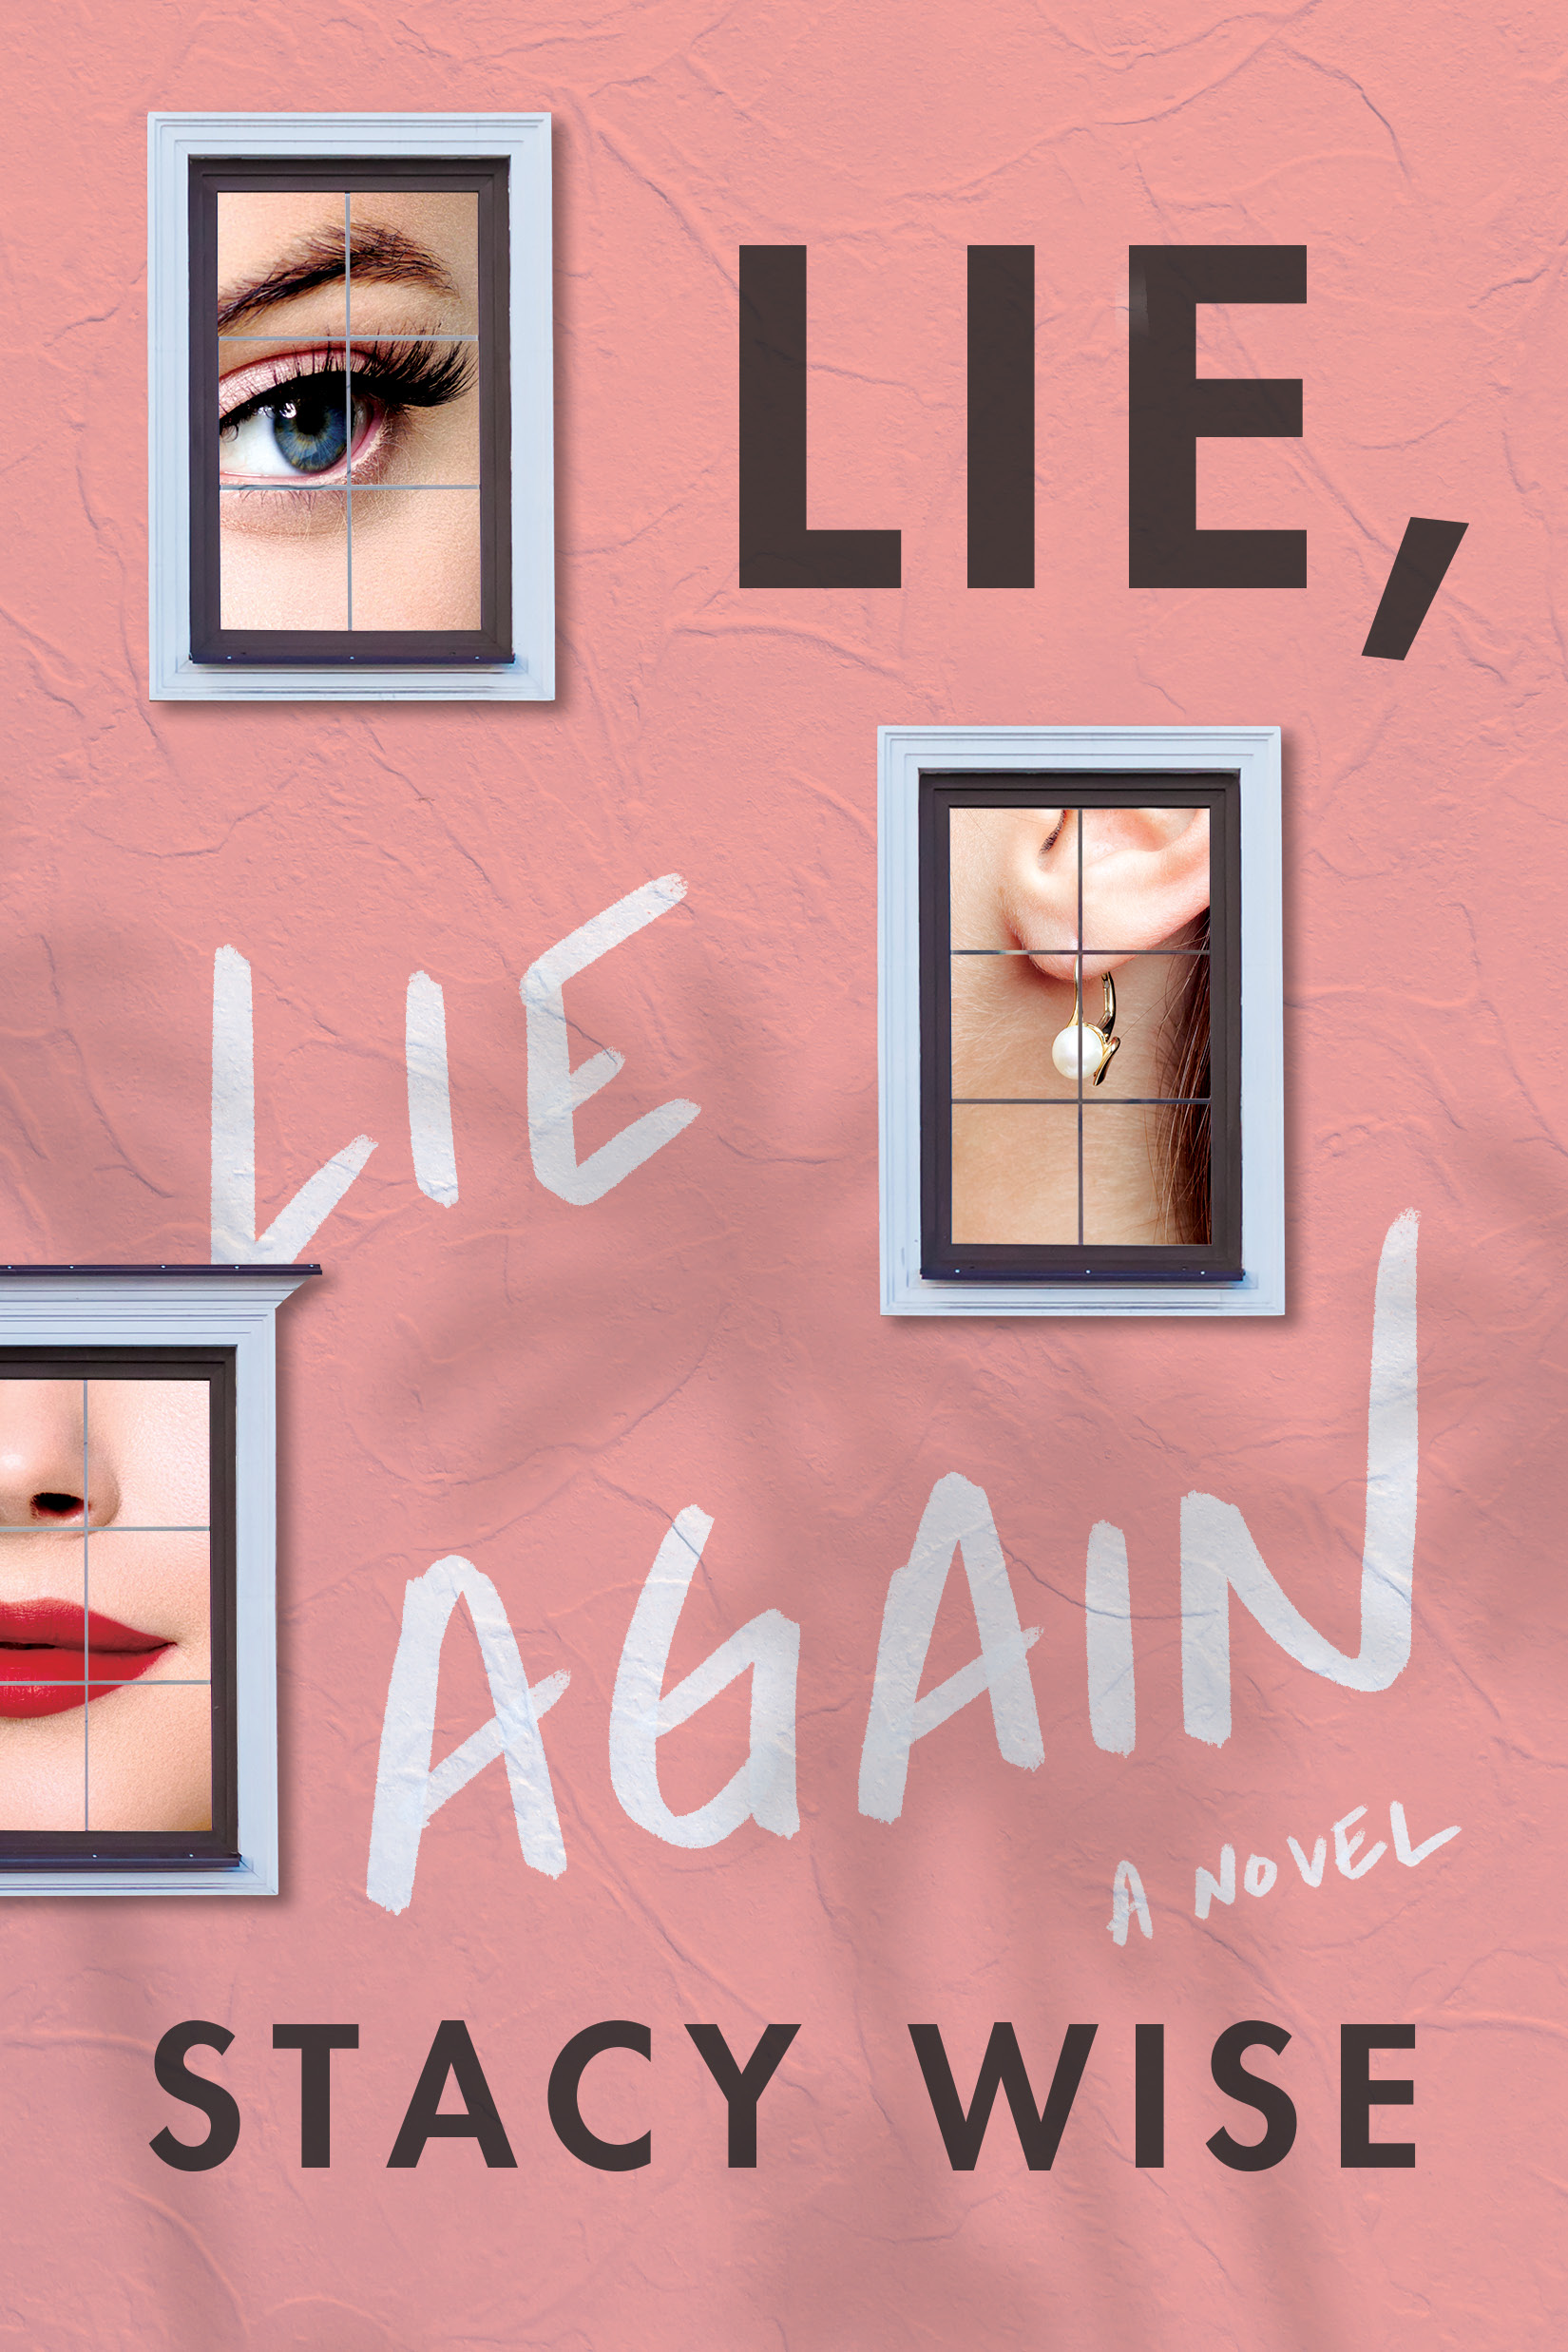 lie lie again by stacy wise